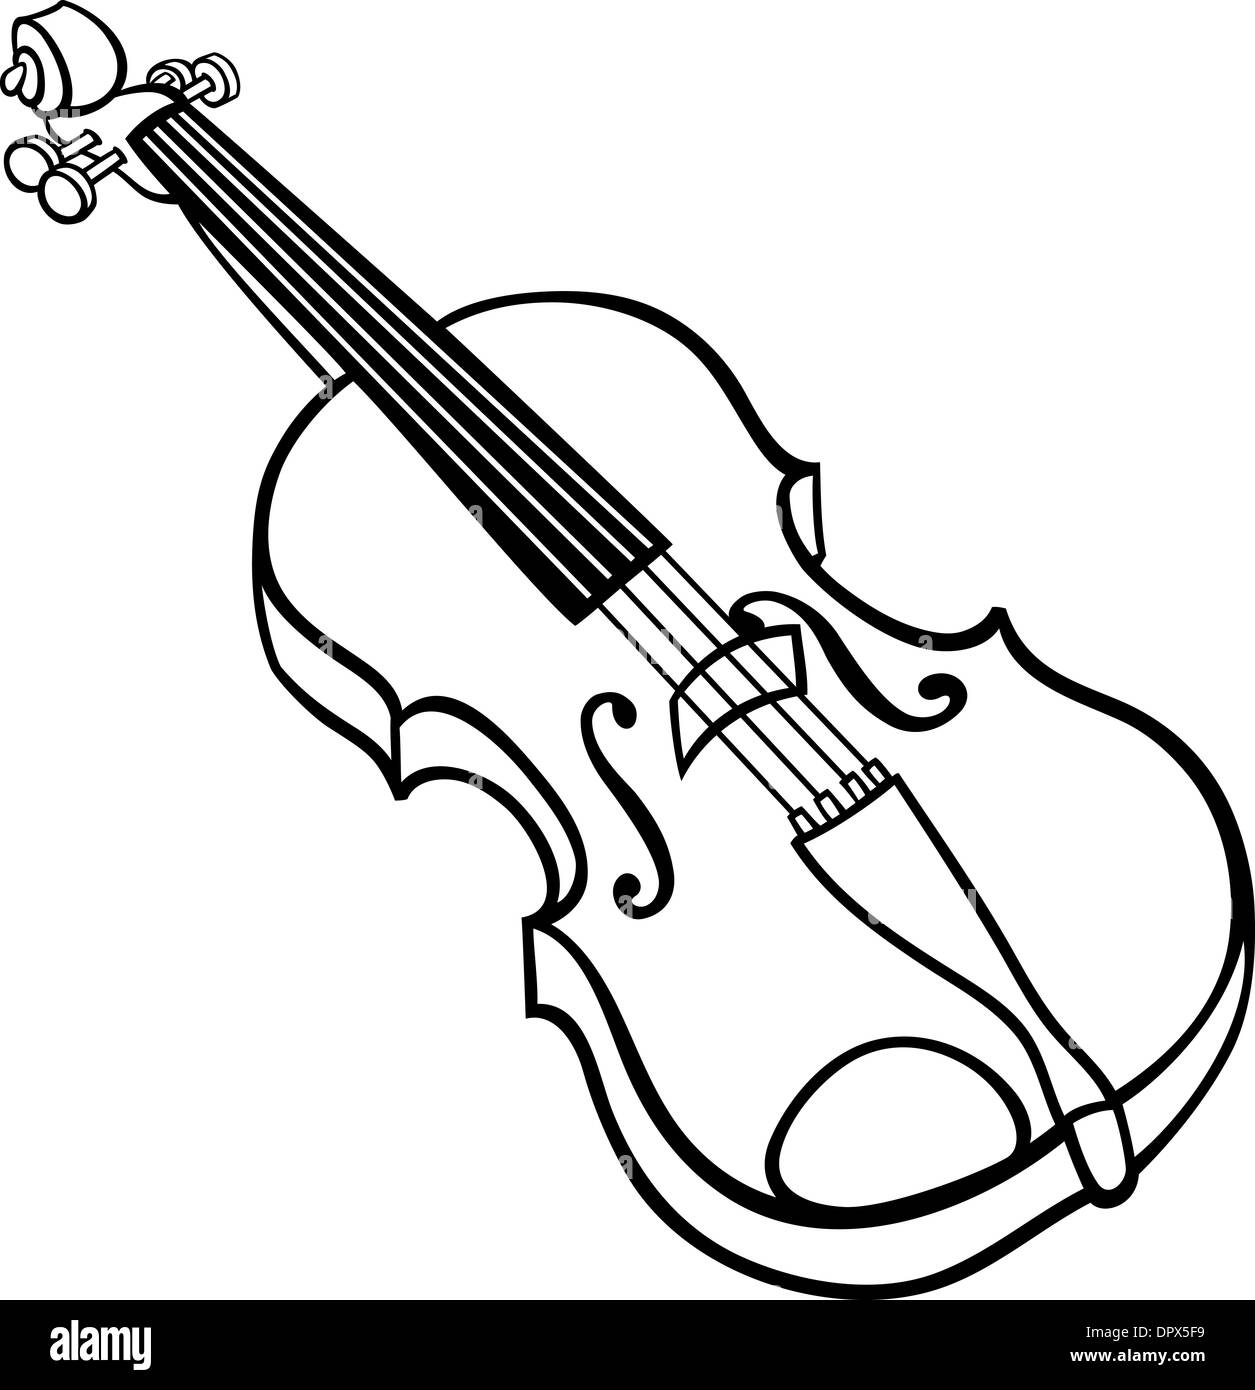 Black and white cartoon illustration of violin musical instrument clip art for coloring book stock photo